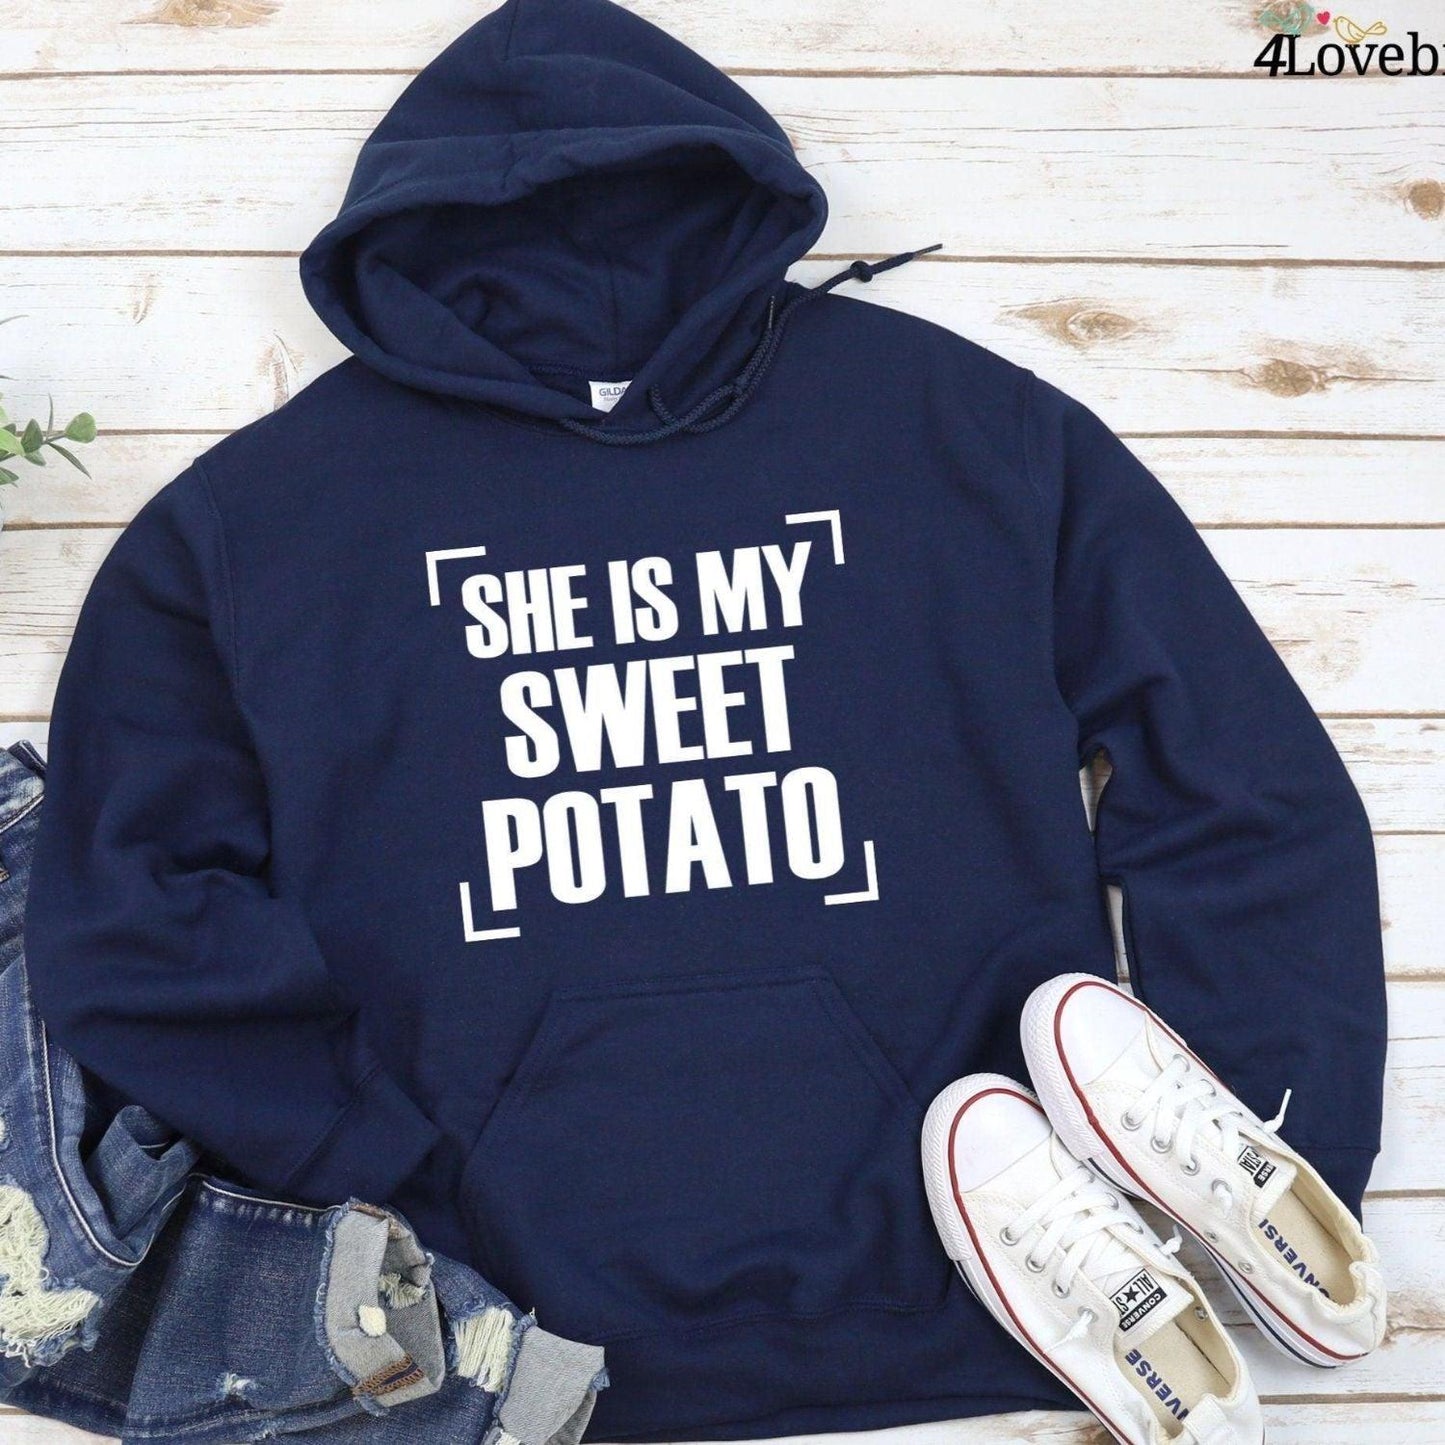 Friendsgiving Matching Set: 'She's My Sweet Potato/I Yam' - Perfect Thanksgiving Outfits! - 4Lovebirds